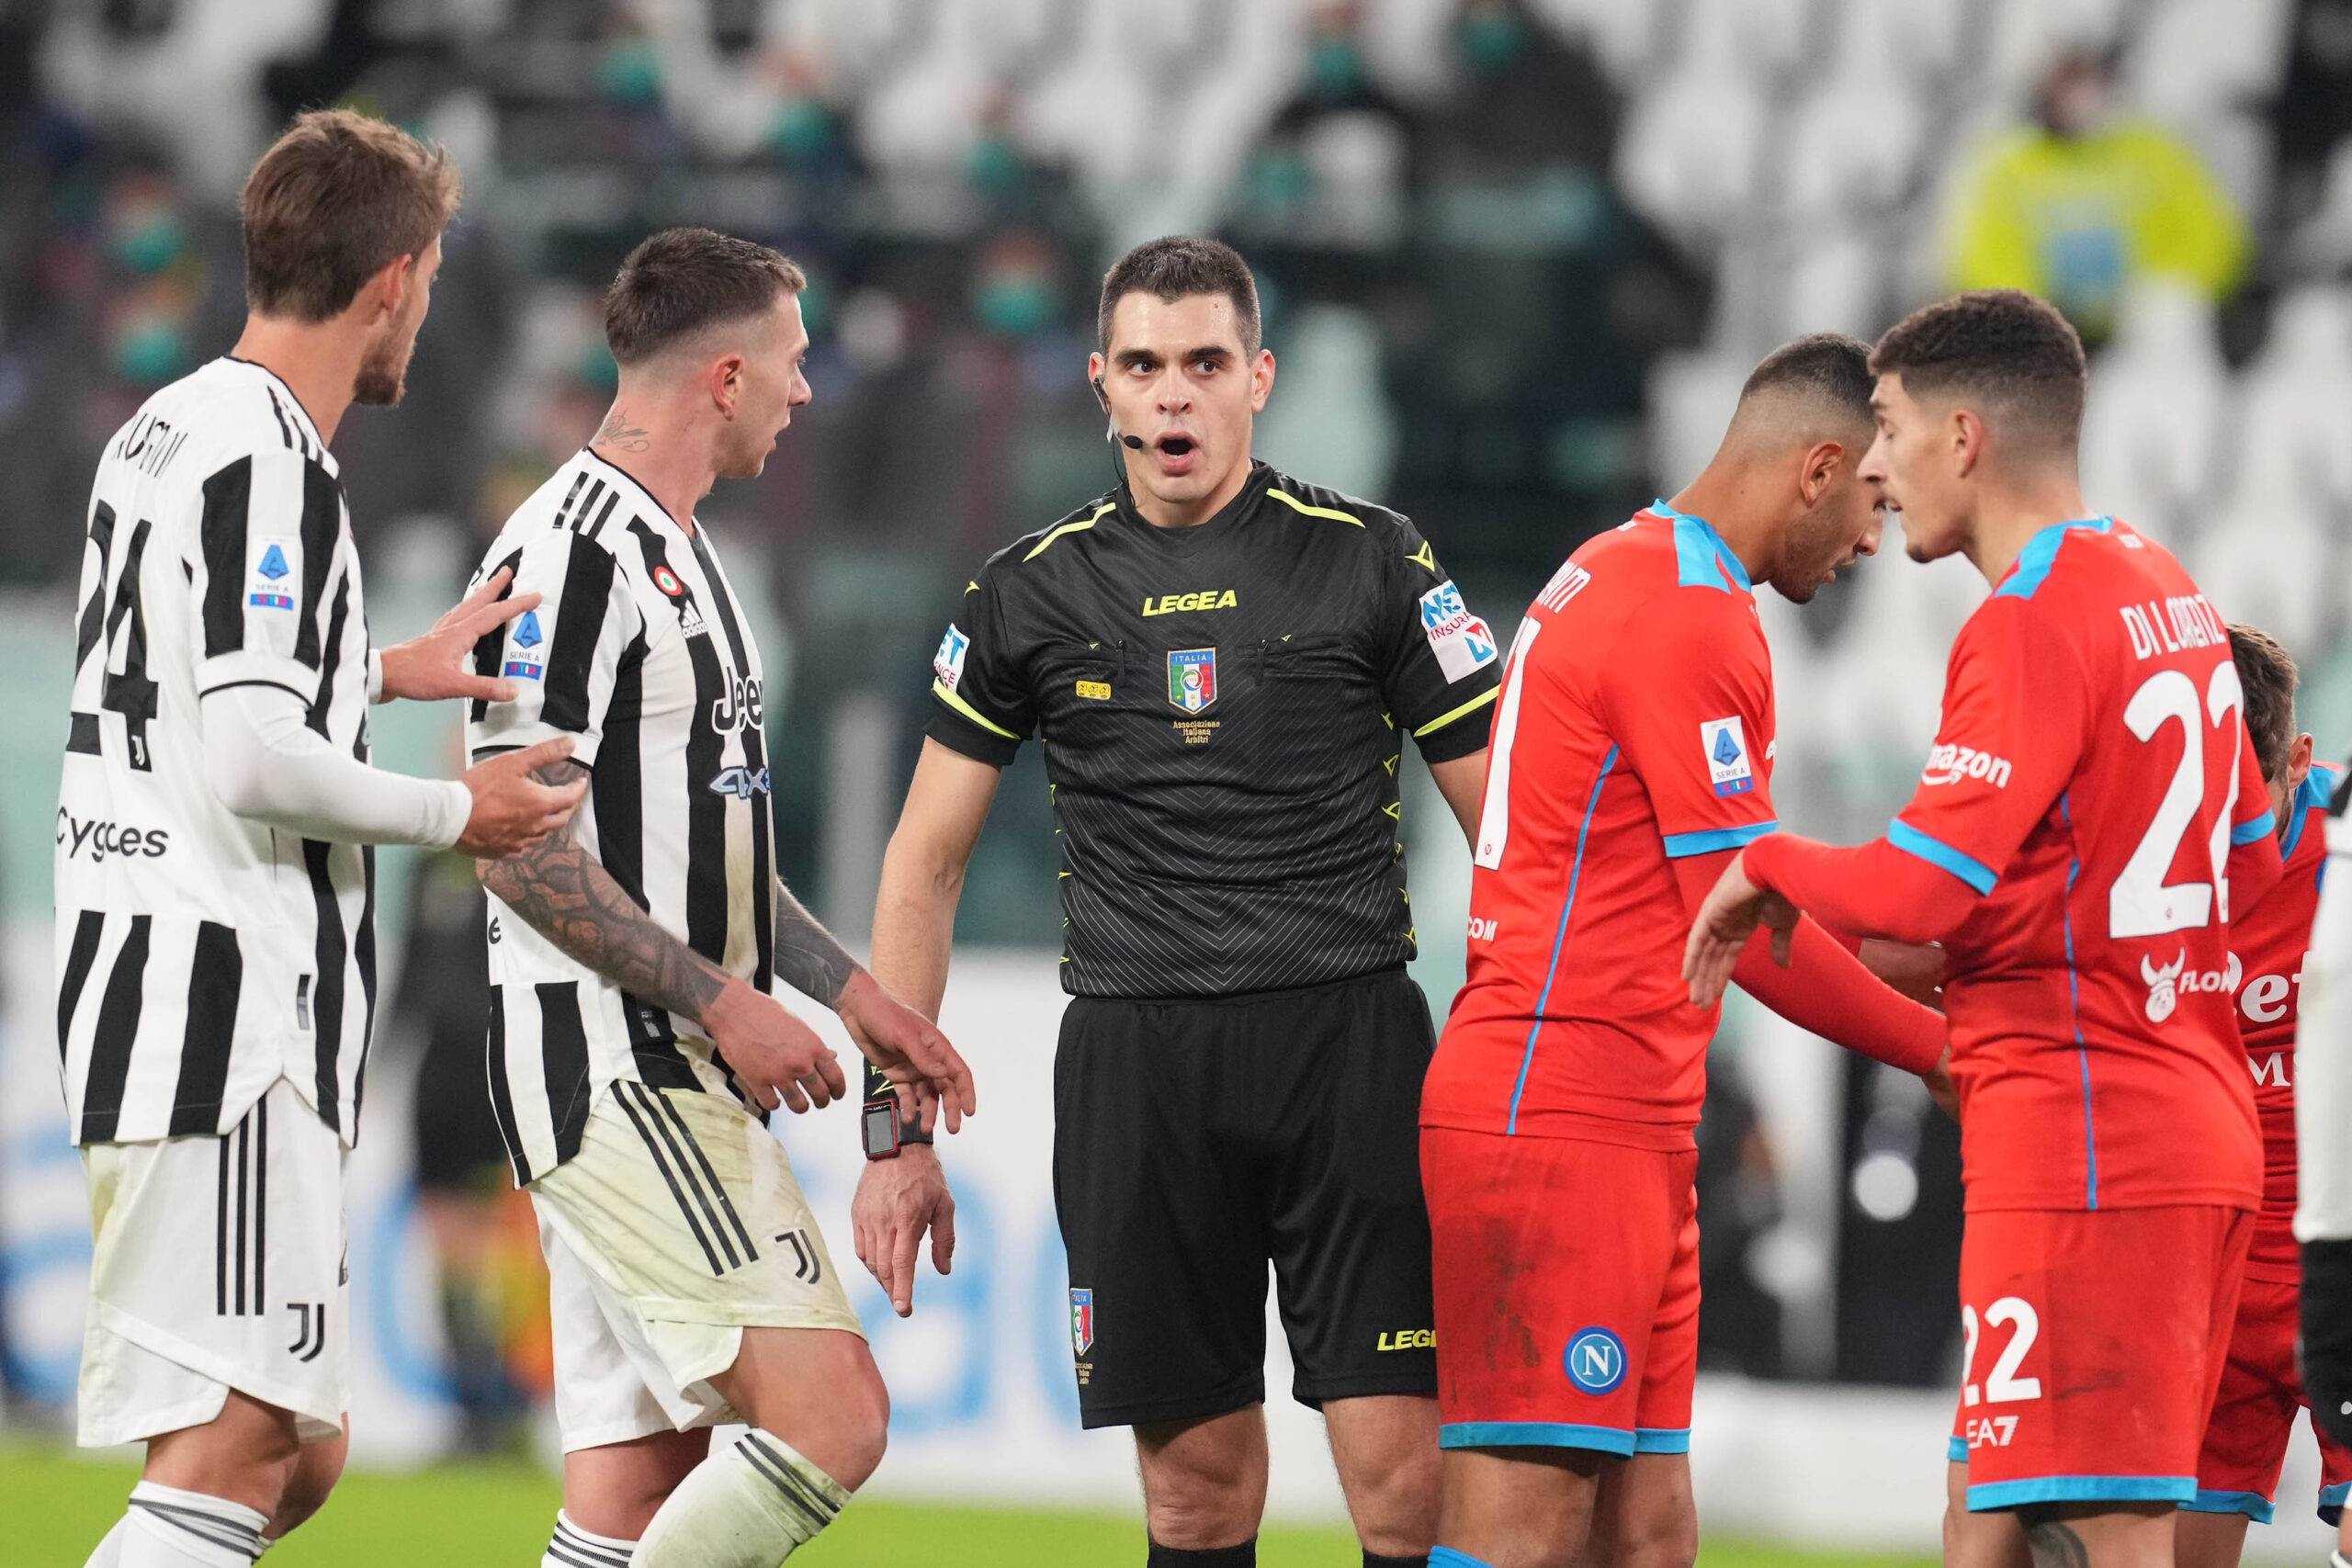 TURIN, ITALY JANUARY 6: The referee Simone Sozza during the Serie A match between Juventus FC and SSC Napoli at the Allianz Stadium on January 6, 2022 in Turin Italy Copyright: xFOTOAGENZIAx